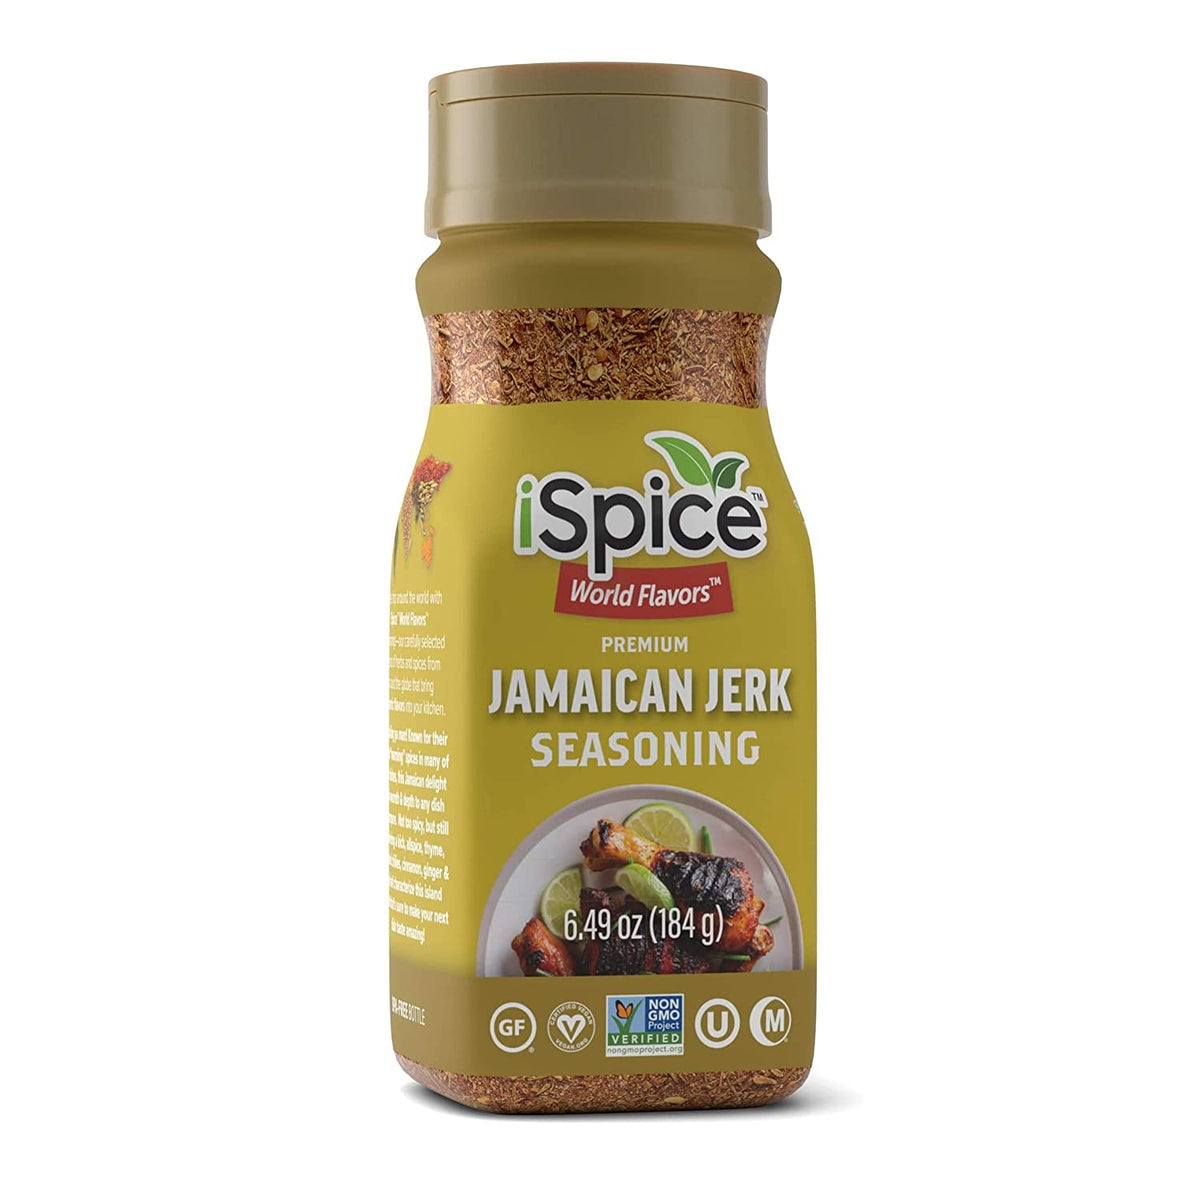 Introducing 7 CHICKEN BOTANIC Spice: All New Exotic Flavors